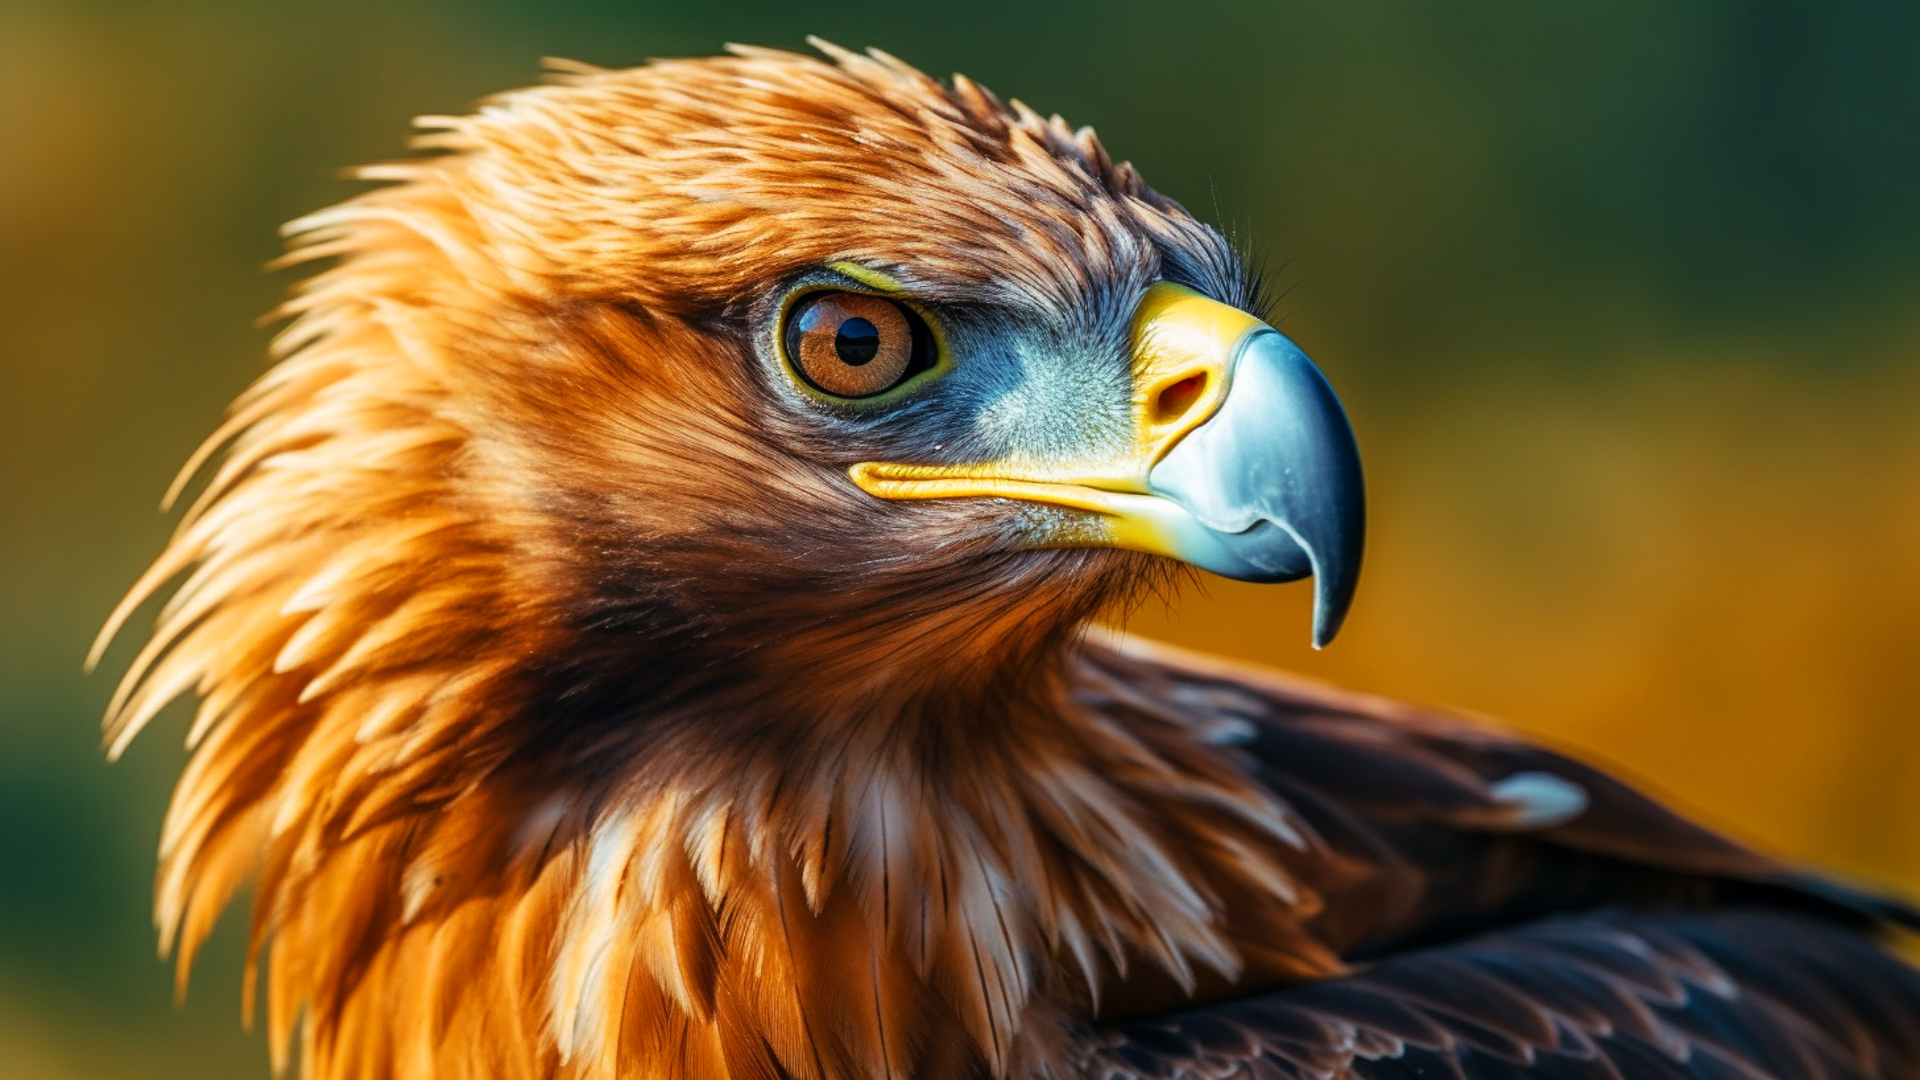 General 1920x1080 eagle bird of prey nature animals blurred blurry background simple background AI art